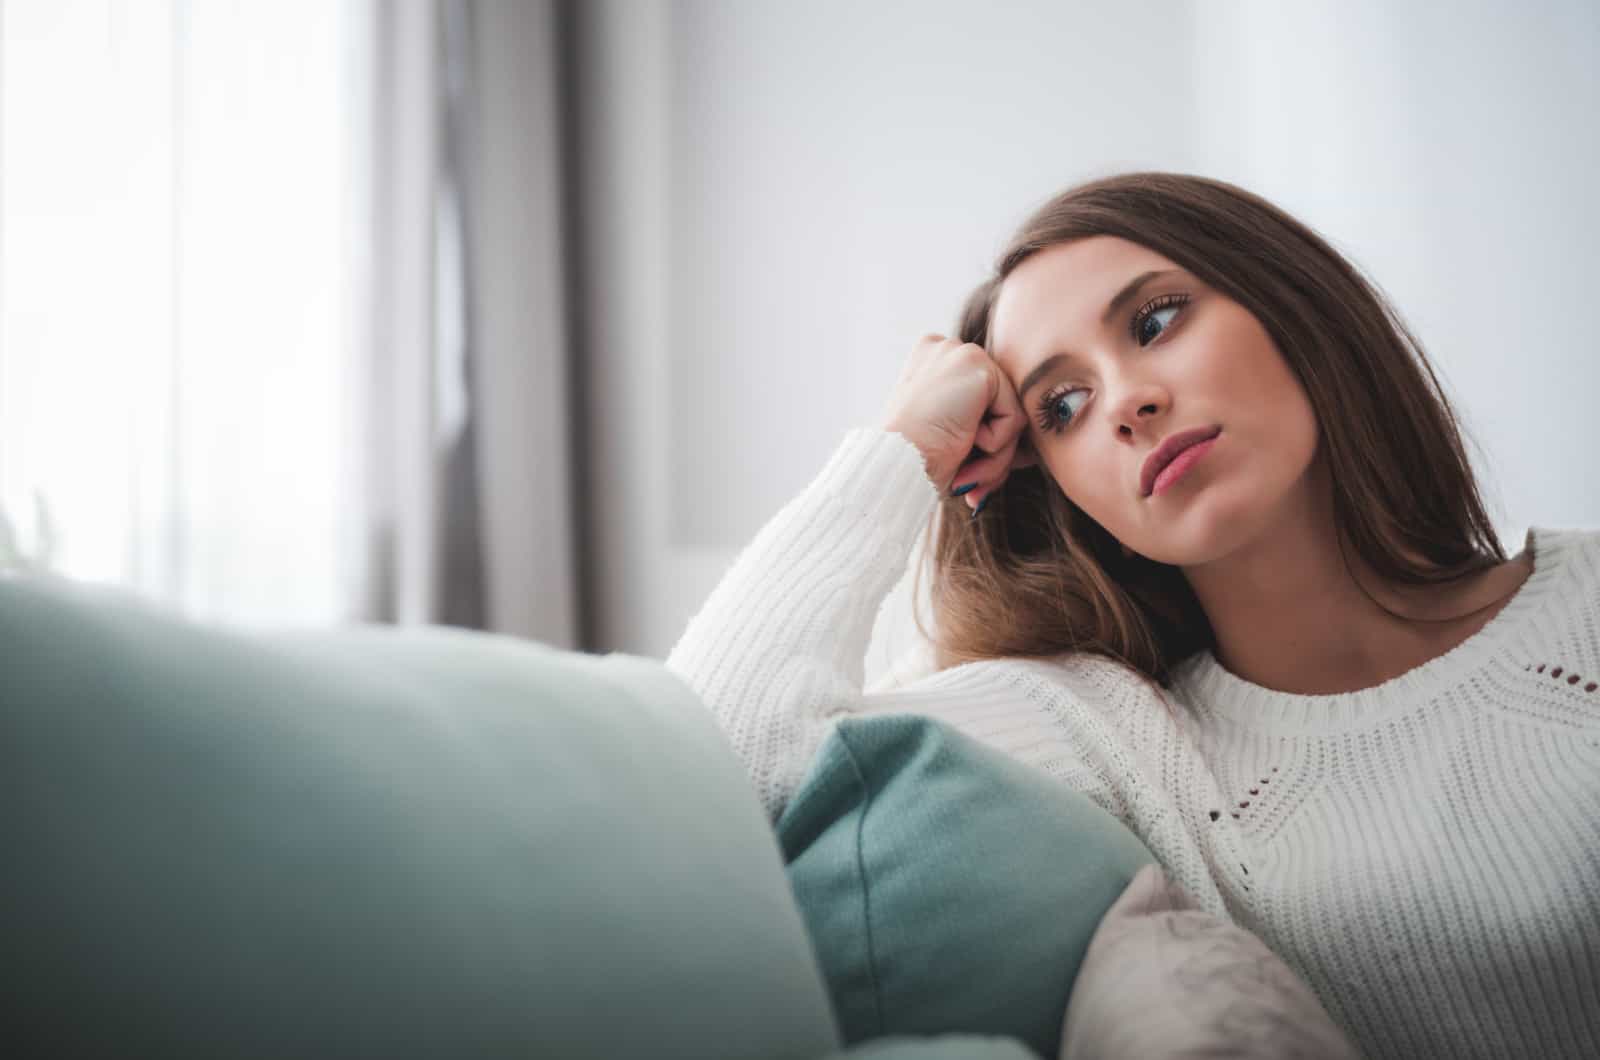 girl sitting on couch thinking about something